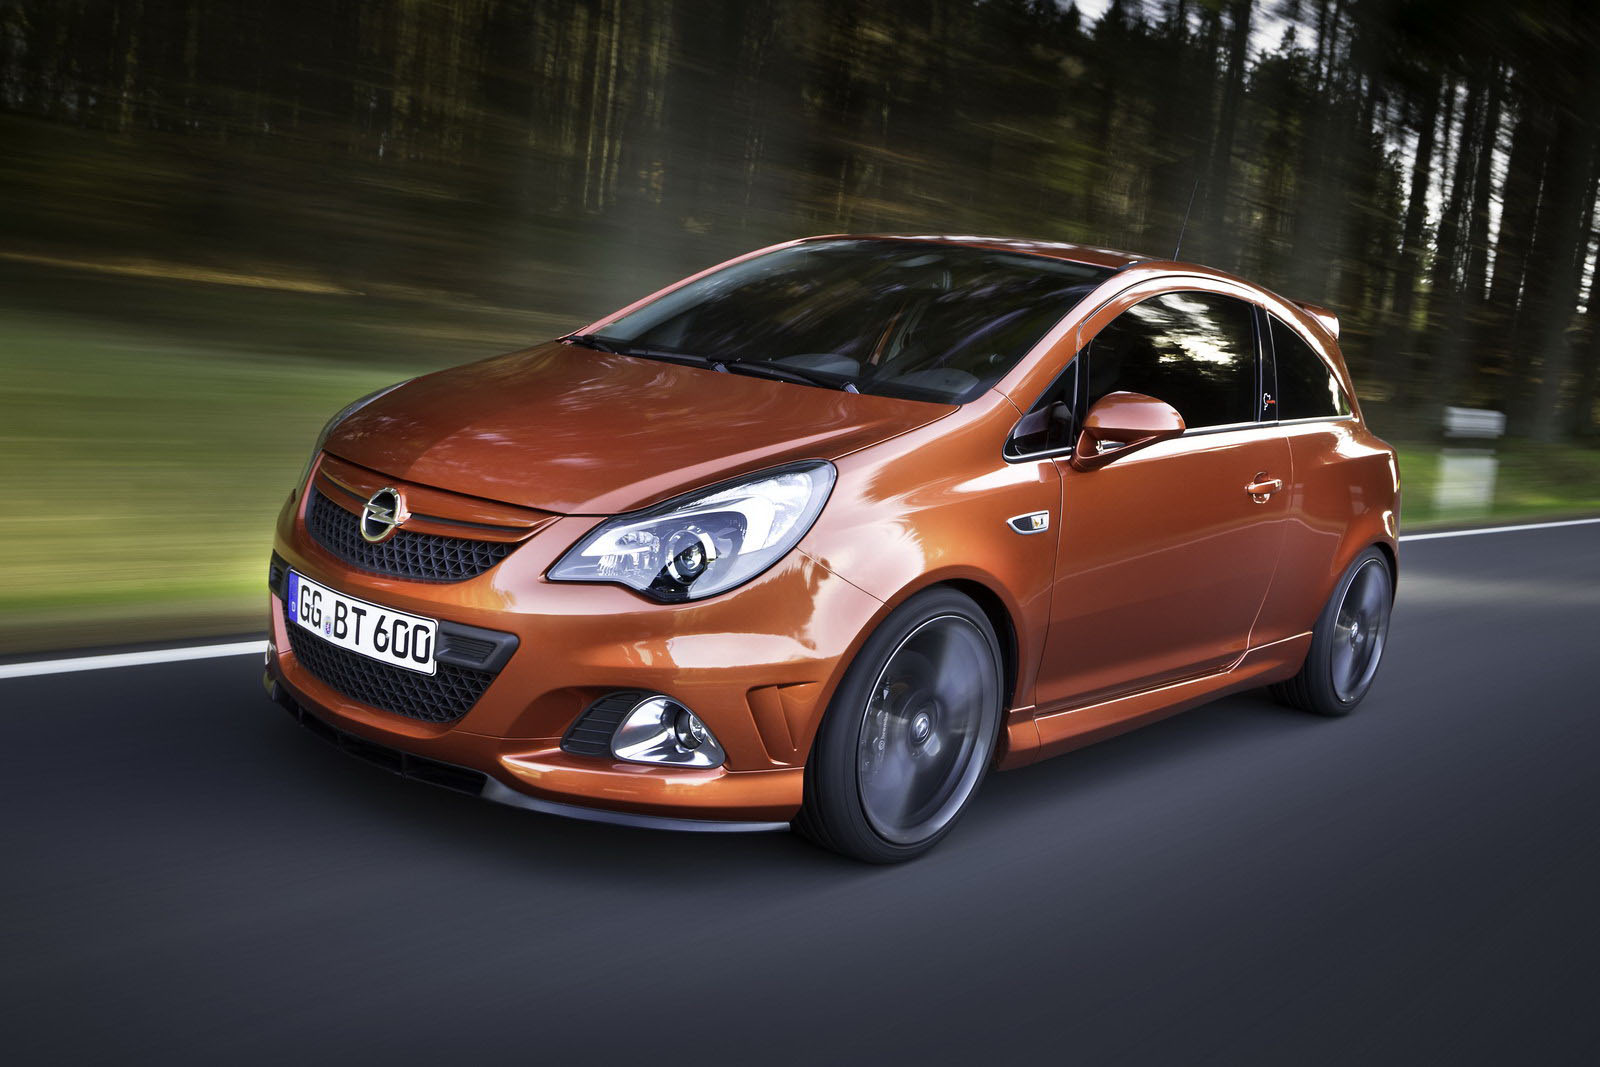 Opel Corsa OPC Nürburgring Edition with BILSTEIN sports suspension